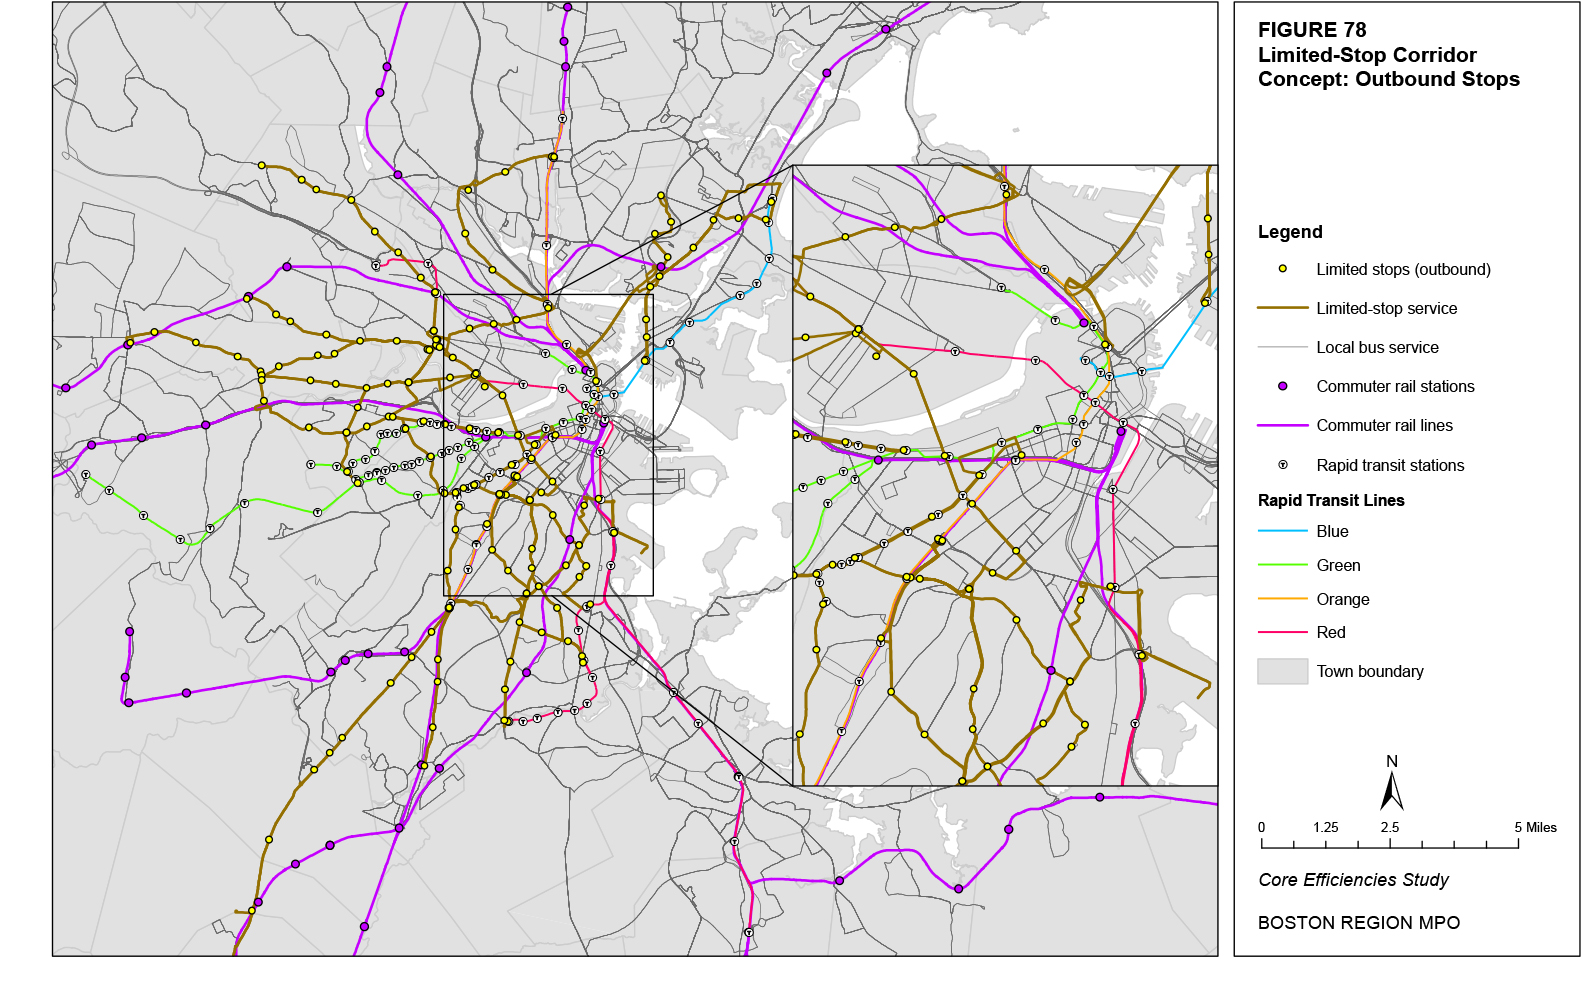 This map shows the MBTA bus, rapid transit, and commuter rail network with the proposed changes in the limited-stop corridor concept for outbound bus service.